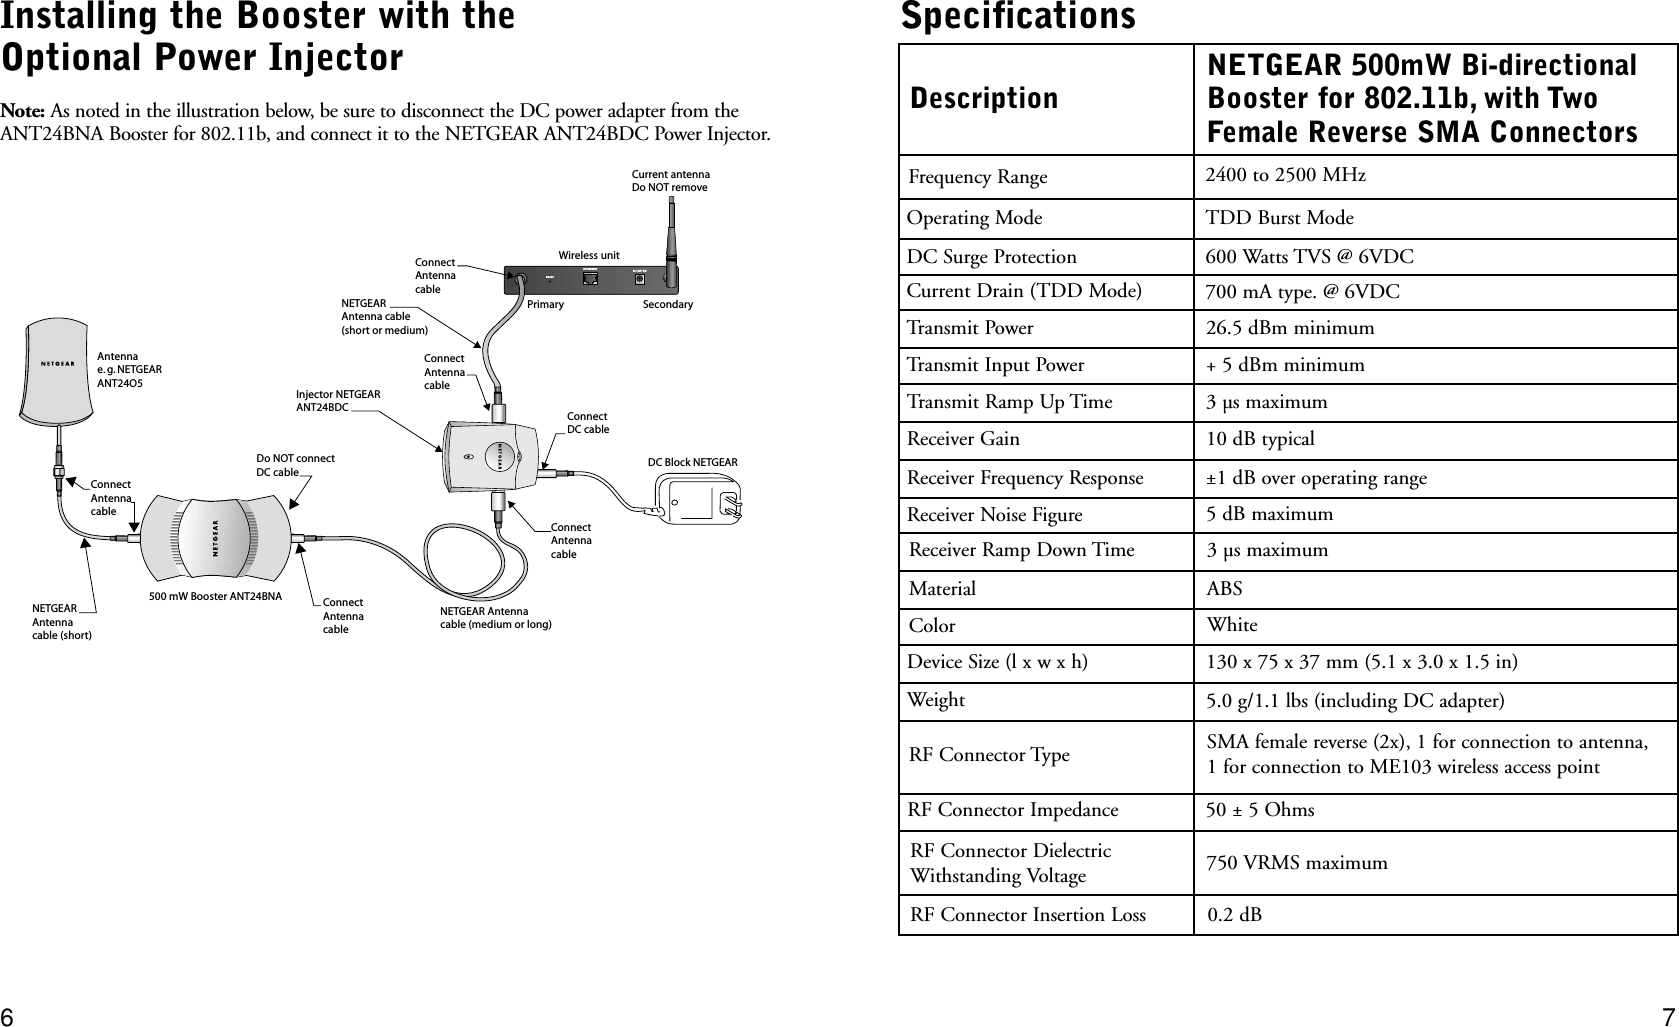 SpecificationsInstalling the Booster with the Optional Power InjectorNote: As noted in the illustration below, be sure to disconnect the DC power adapter from theANT24BNA Booster for 802.11b, and connect it to the NETGEAR ANT24BDC Power Injector.76Description26.5 dBm minimumFrequency RangeOperating Mode DC Surge ProtectionCurrent Drain (TDD Mode)Transmit Power+ 5 dBm minimumTransmit Input Power2400 to 2500 MHzTDD Burst Mode 600 Watts TVS @ 6VDC700 mA type. @ 6VDCNETGEAR 500mW Bi-directionalBooster for 802.11b, with TwoFemale Reverse SMA Connectors3 µs maximumTransmit Ramp Up Time10 dB typicalReceiver Gain±1 dB over operating rangeReceiver Frequency Response5 dB maximumReceiver Noise Figure3 µs maximumReceiver Ramp Down TimeABSMaterialWhiteColor130 x 75 x 37 mm (5.1 x 3.0 x 1.5 in)Device Size (l x w x h)5.0 g/1.1 lbs (including DC adapter)WeightSMA female reverse (2x), 1 for connection to antenna, 1 for connection to ME103 wireless access pointRF Connector Type50 ± 5 OhmsRF Connector Impedance750 VRMS maximumRF Connector DielectricWithstanding Voltage0.2 dBRF Connector Insertion LossETHERNETRESET5-12V DC Wireless unitNETGEAR Antenna cable (medium or long)NETGEARAntenna cable (short or medium)ConnectAntenna cable500 mW Booster ANT24BNANETGEARAntenna cable (short)Antennae. g. NETGEARANT24O5ConnectAntenna cableConnectAntenna cableDo NOT connectDC cableConnectAntenna cableSecondaryPrimaryCurrent antenna Do NOT removeDC Block NETGEARConnect DC cable Connect Antenna cable Injector NETGEARANT24BDC